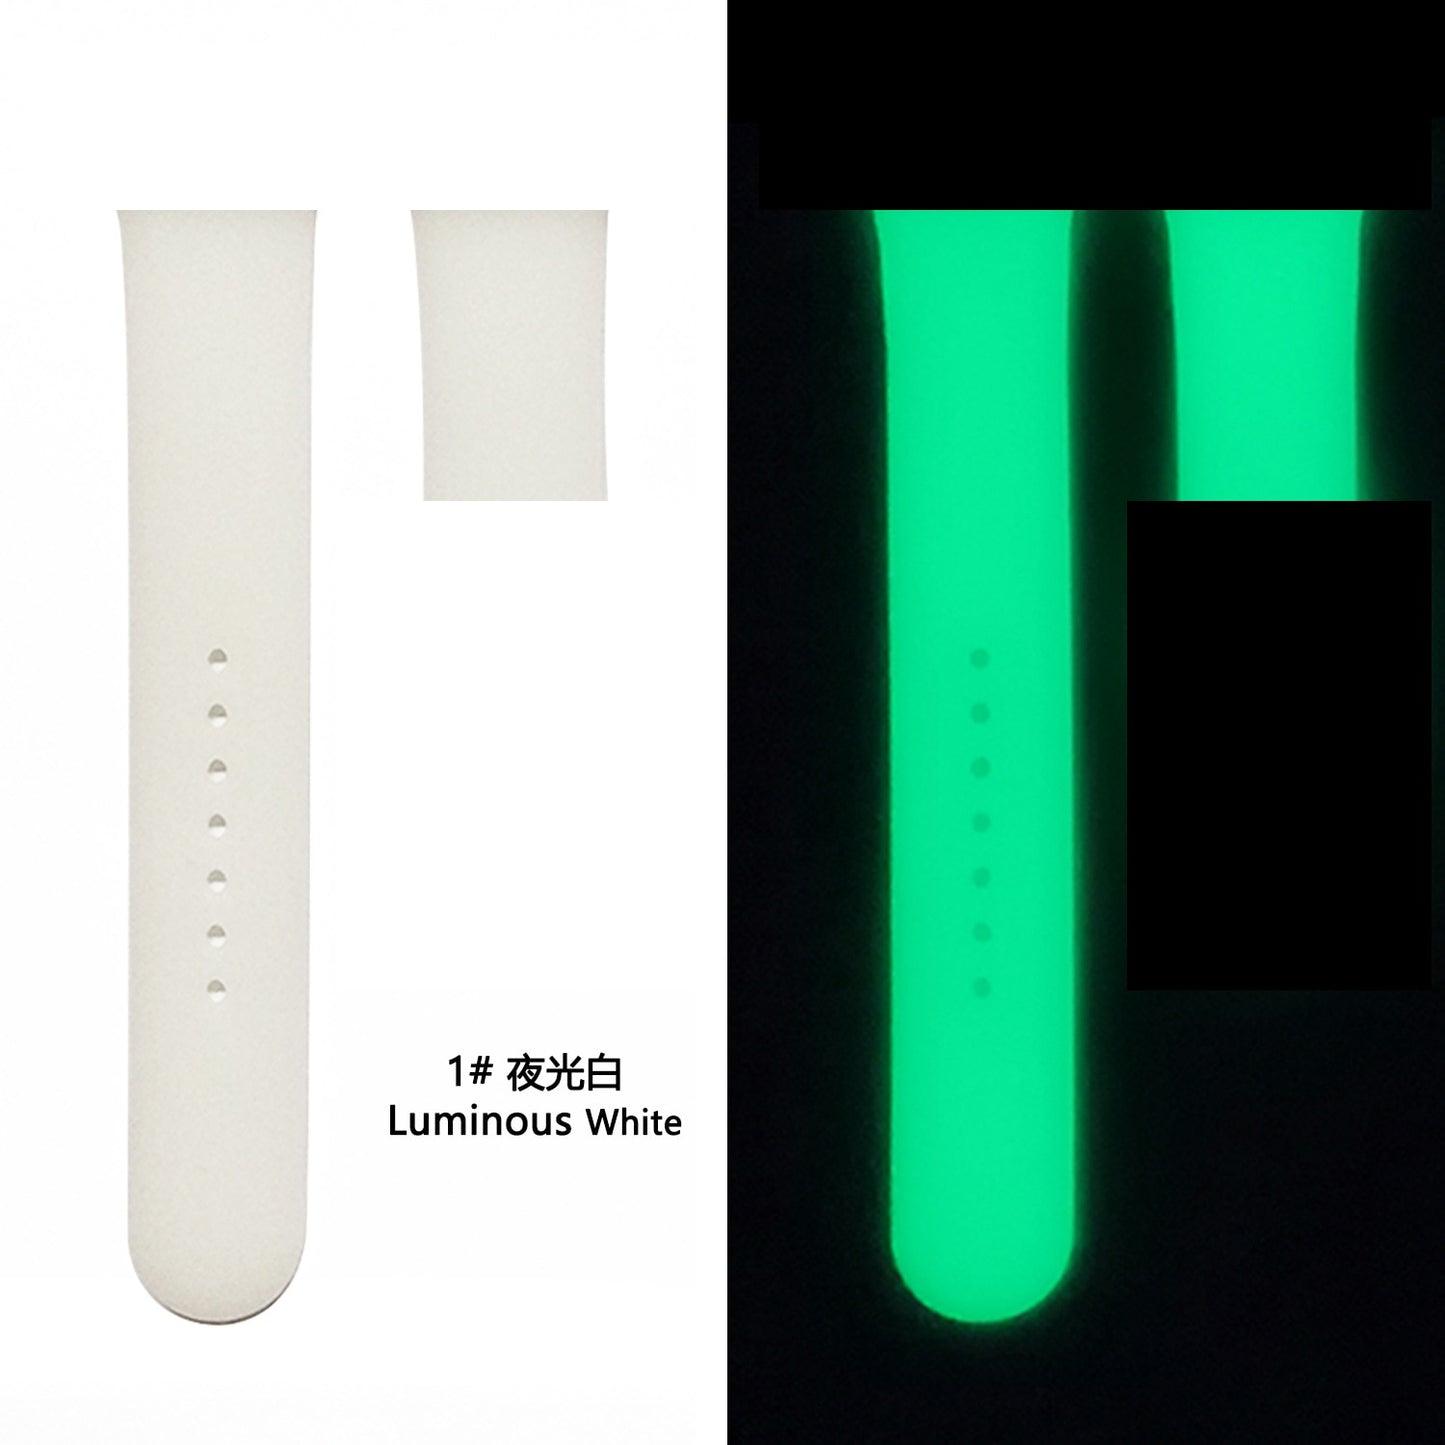 Luminous Silicone Strap For Apple Watch Band Ultra 49mm 8 7 45/41mm Sport Loop Bracelet For Iwatch 6 5 4 Se 44mm 42mm 40mm 38mm - China / luminous white / 38 40 41mm  SM - United States / luminous white / 38 40 41mm  SM - China / luminous white / 38 40 41mm  ML - United States / luminous white / 38 40 41mm  ML - China / luminous white / 42 44 45 49mm  SM - United States / luminous white / 42 44 45 49mm  SM - China / luminous white / 42 44 45 49mm  ML - United States / luminous white / 42 44 4...